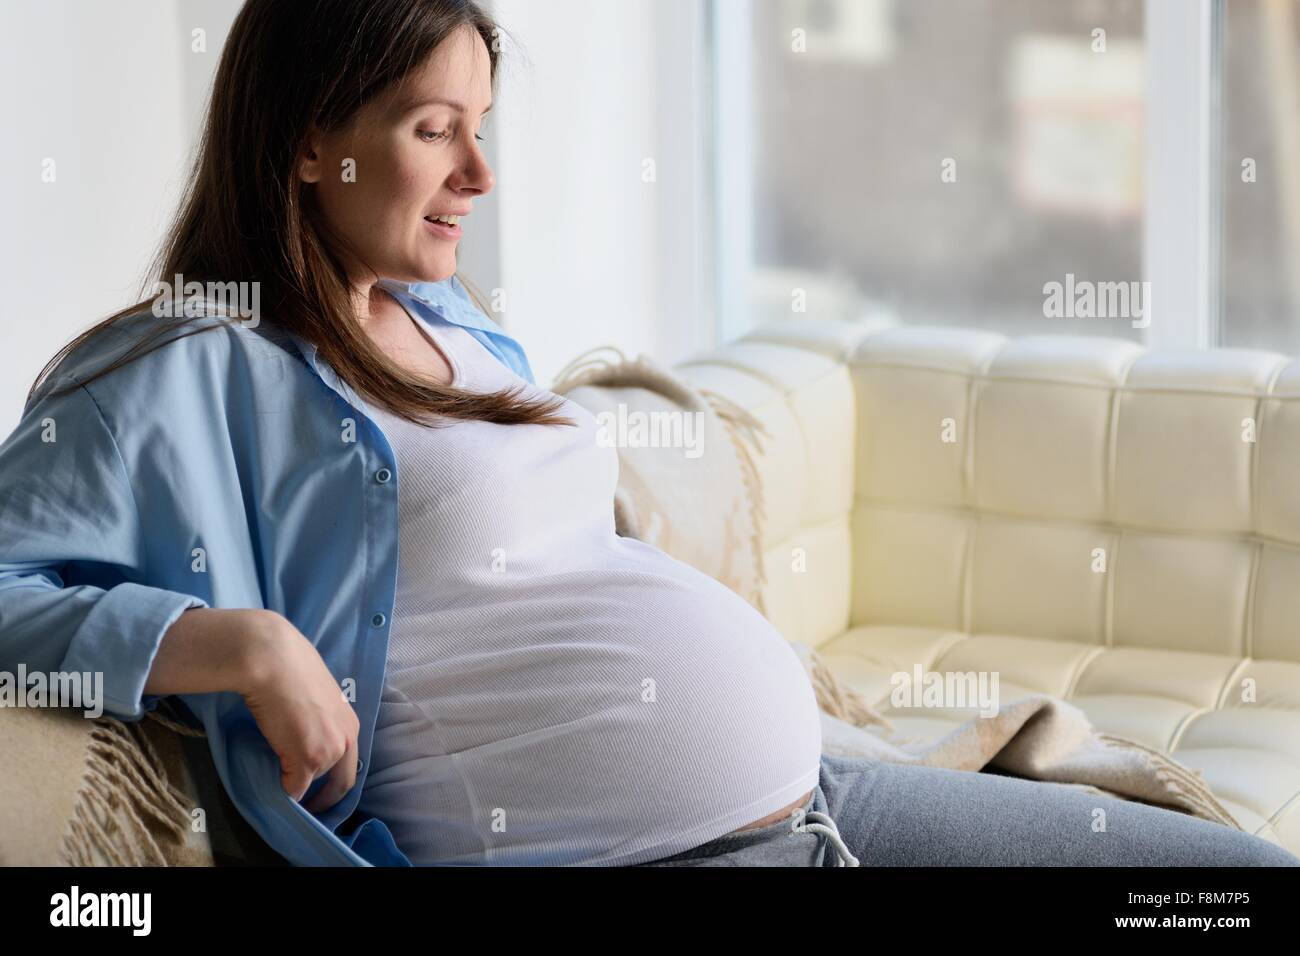 Pregnant woman sitting on sofa Banque D'Images